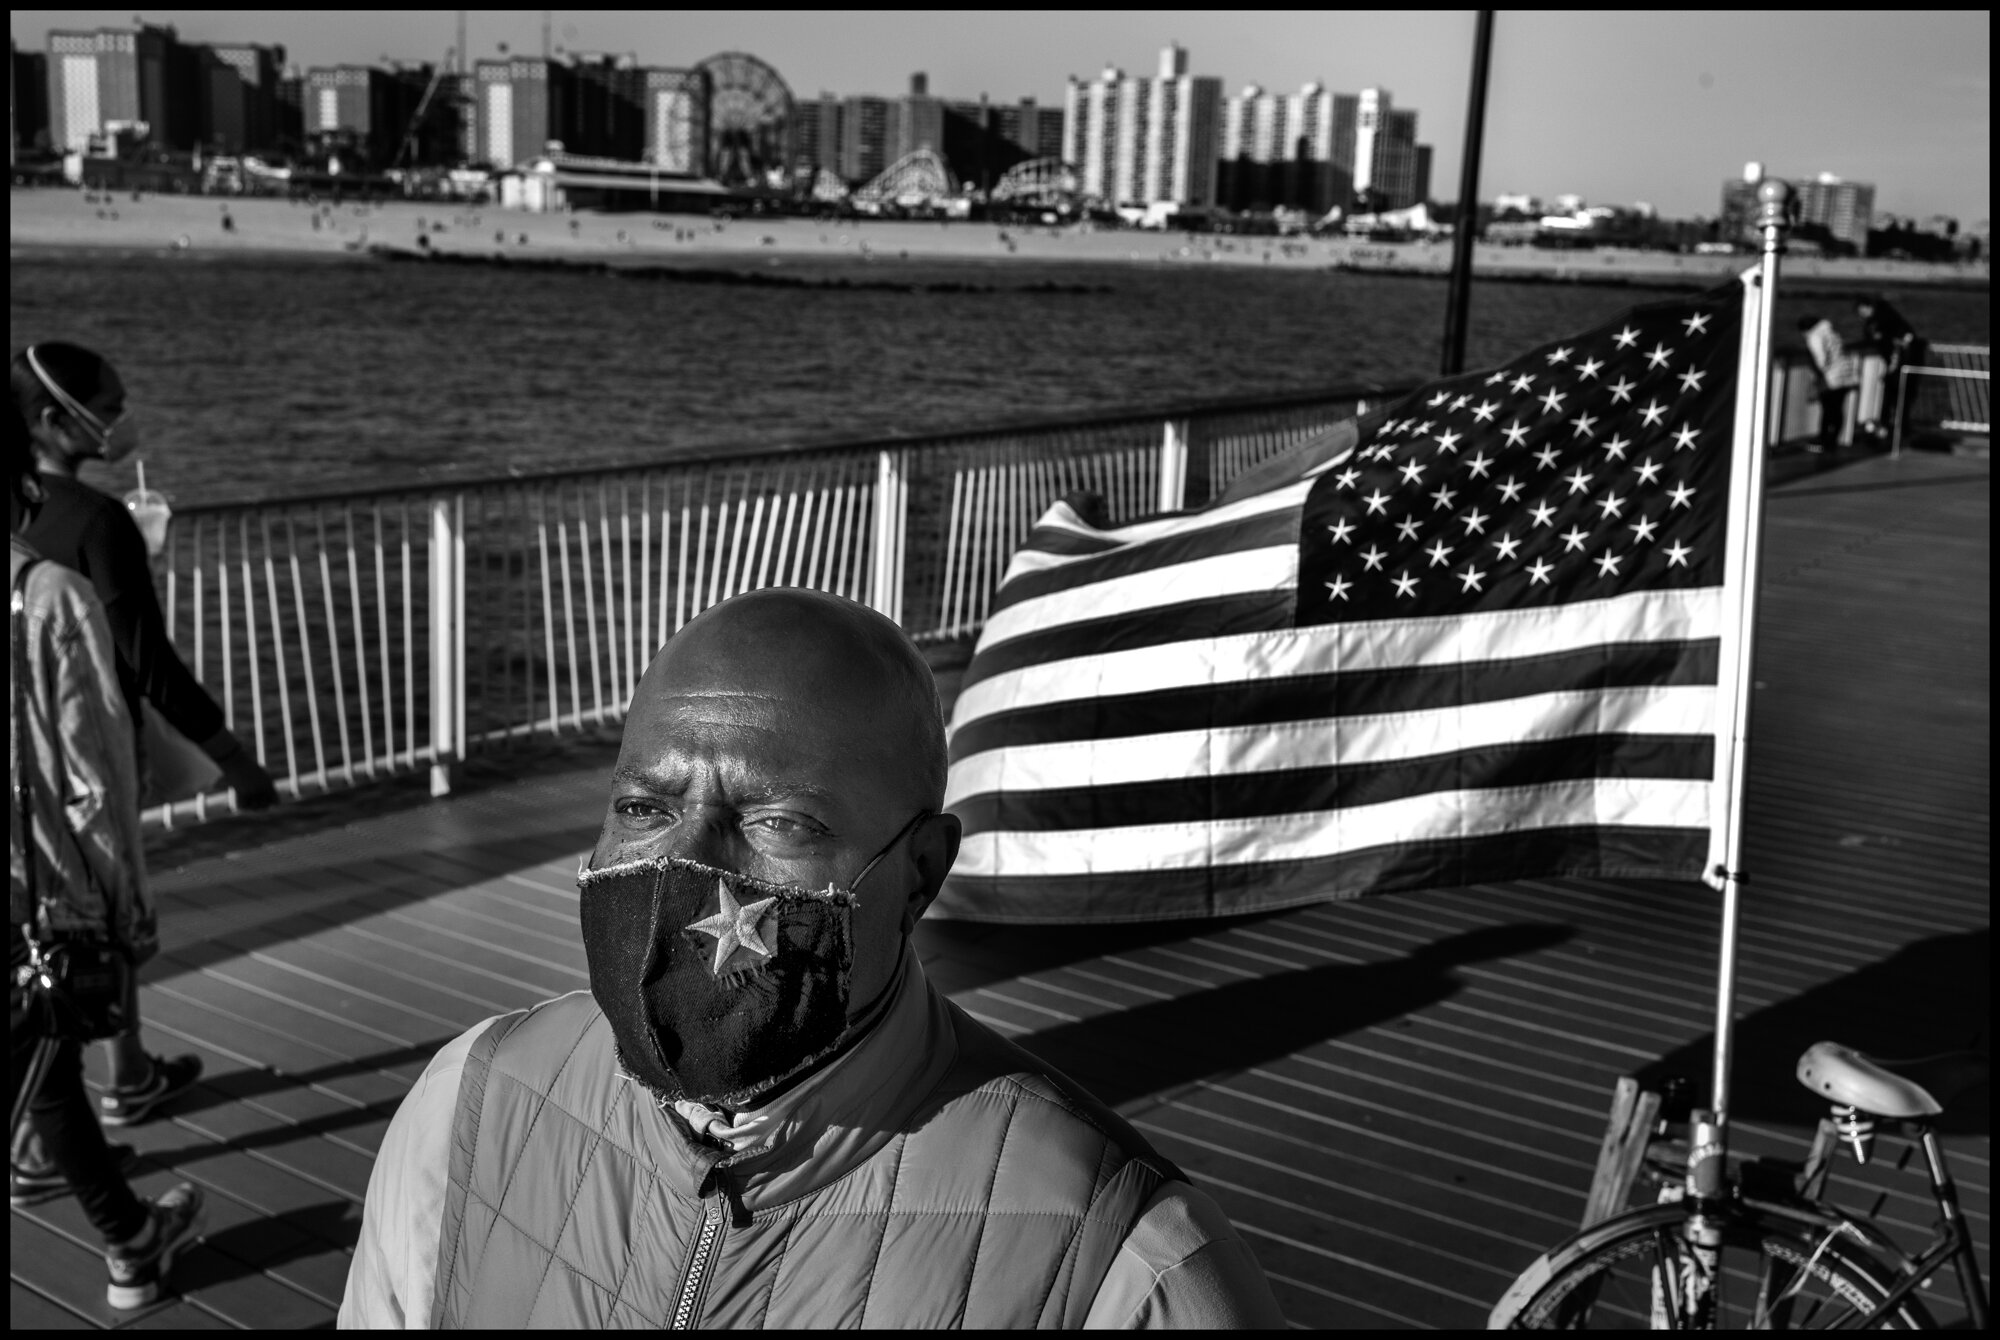  Johnathan, from Brooklyn, is a veteran who comes every day with a US flag to the pier. Coney Island, New York.  May 16, 2020. © Peter Turnley.  ID# 49-013 